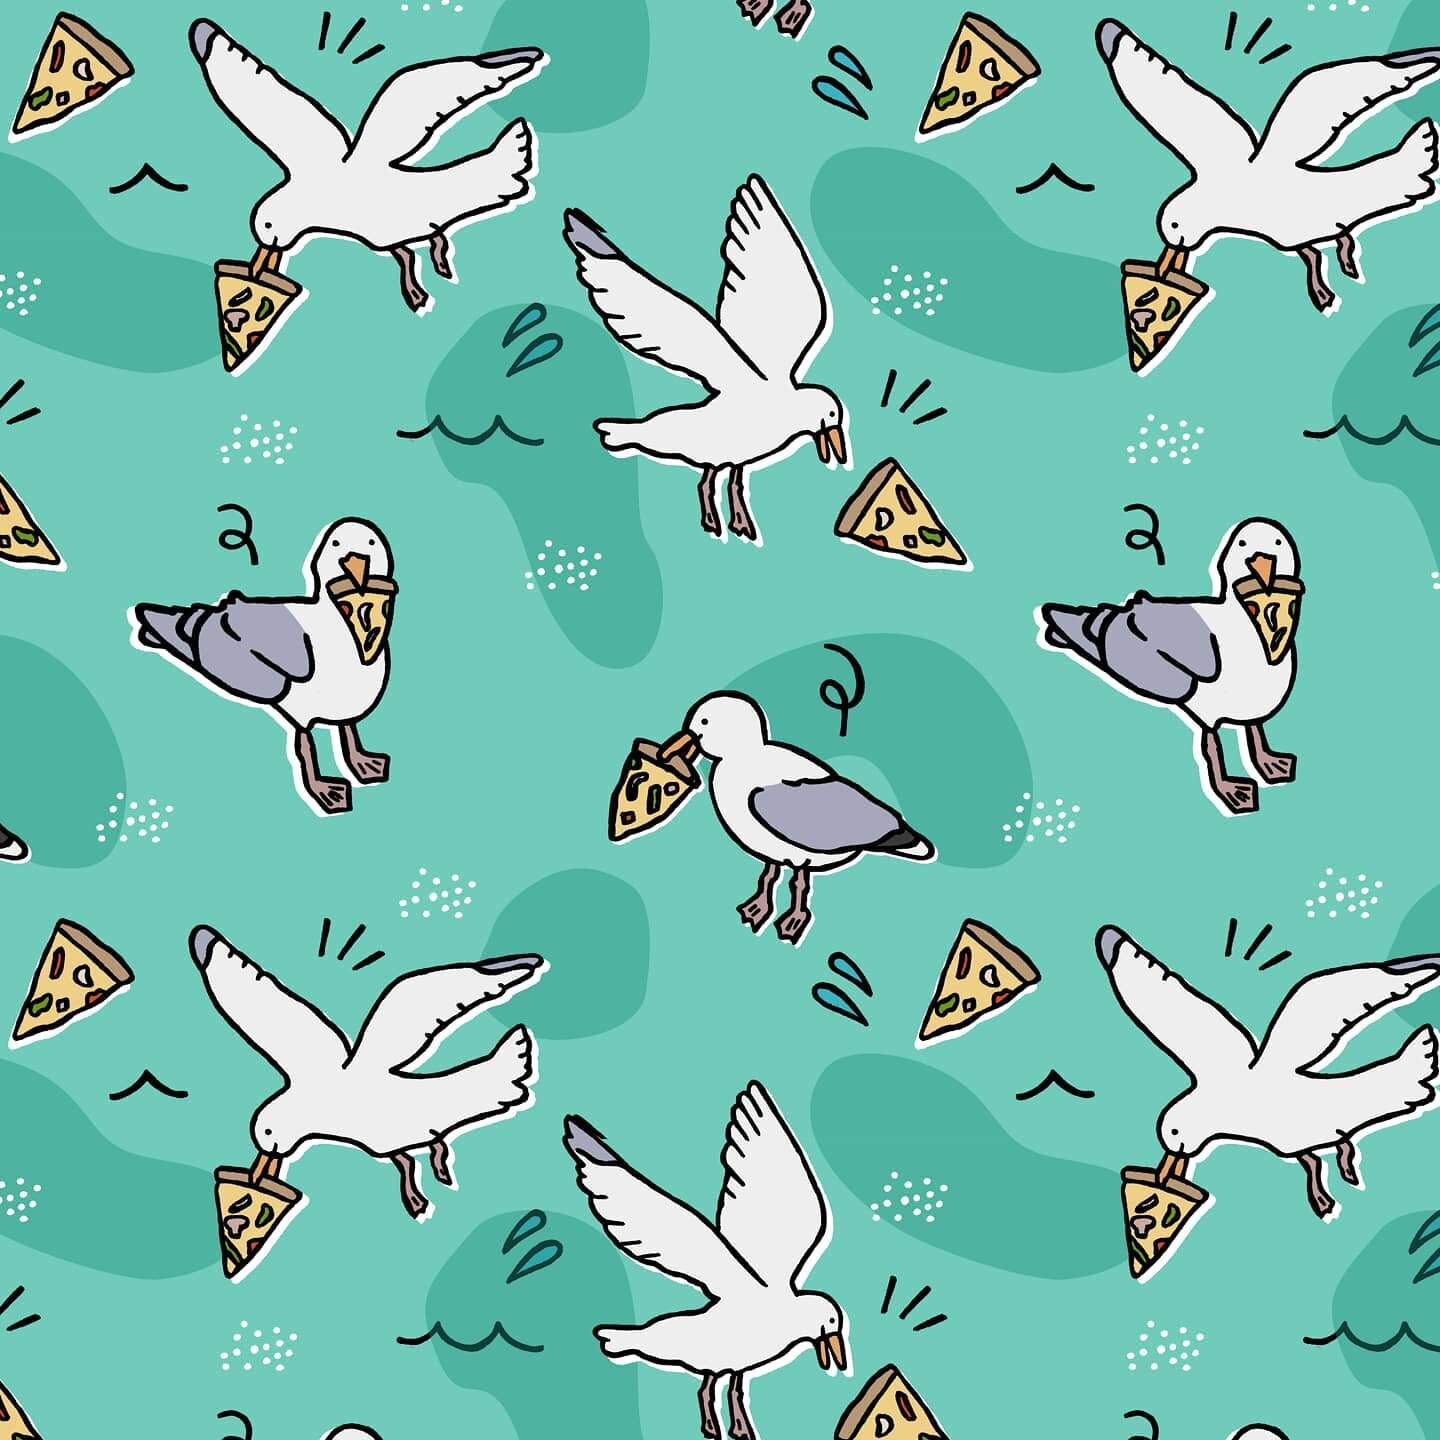 I had so much fun creating this summer inspired pattern. I may be on the east coast now but I sure do miss west coast beach days and yes, even those hungry gulls. 
.
Can't wait to see what this pattern looks on some products! My shop is getting an ov